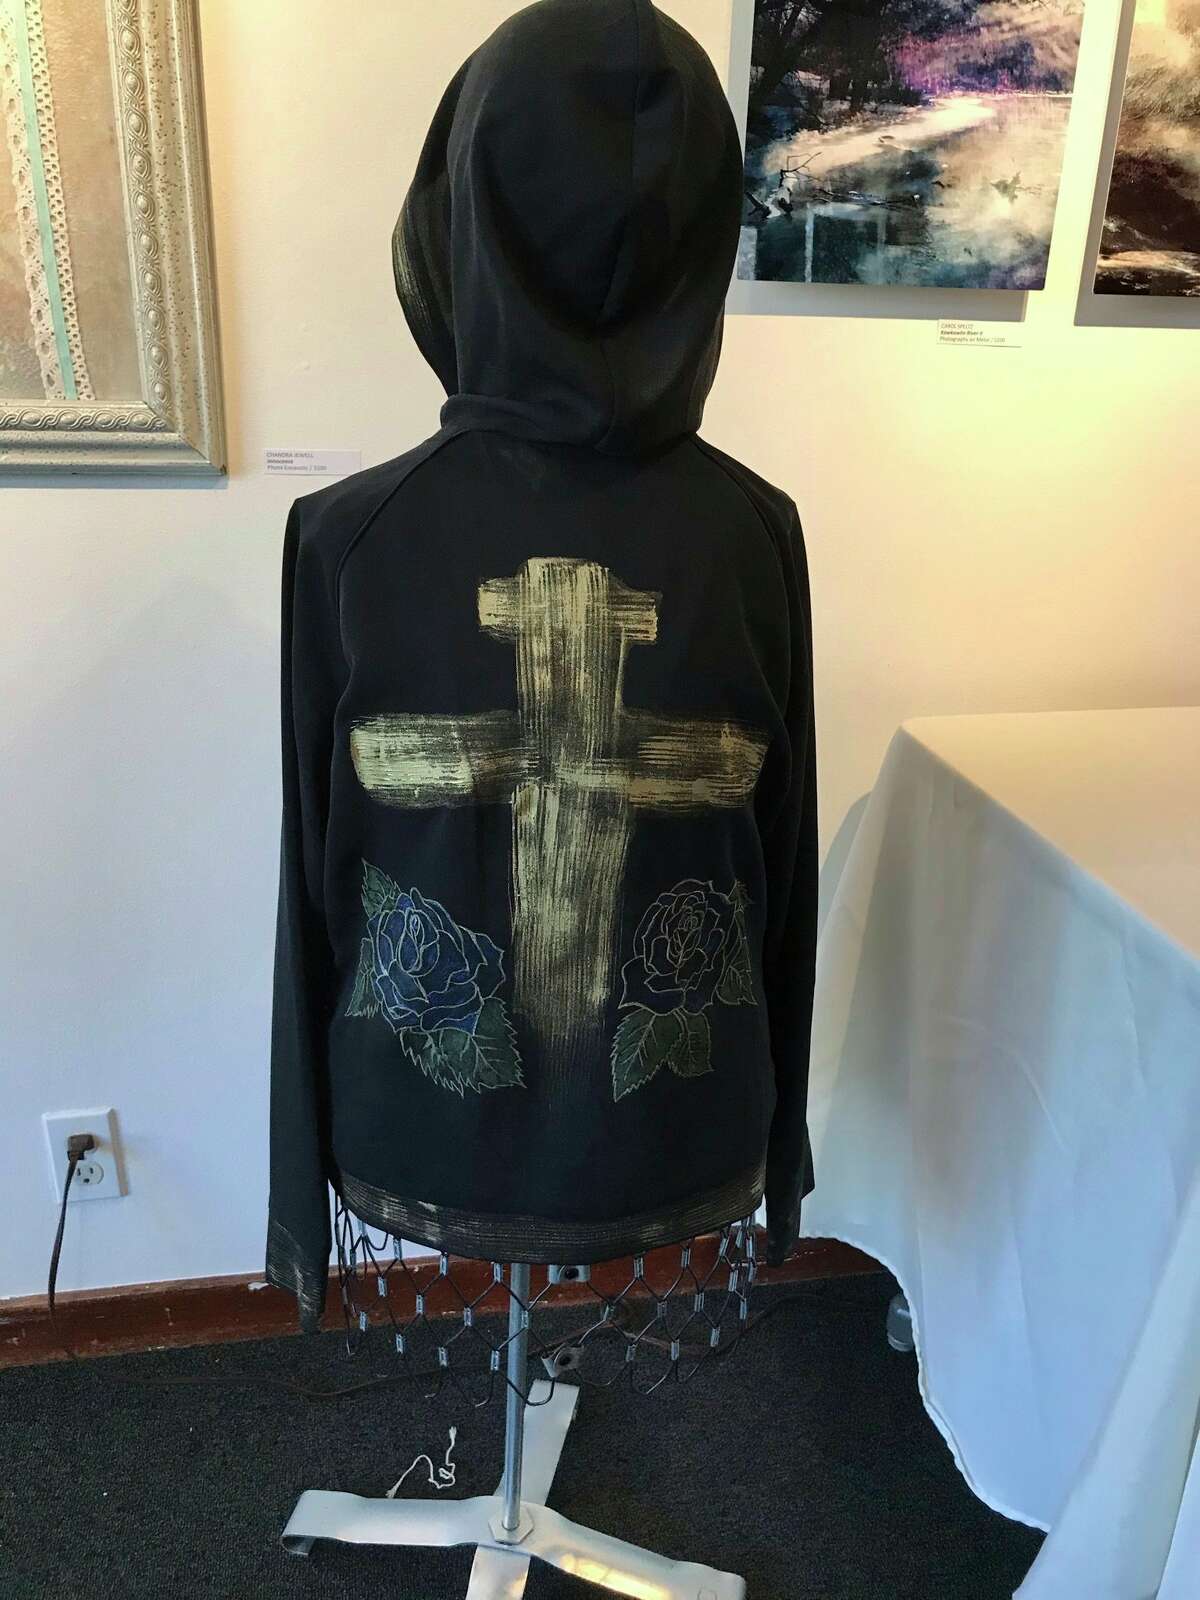 This hand-painted hooded blouse is one of the many items featured in the Spring Fashion Fundraiser at Creative 360. (Photo provided)